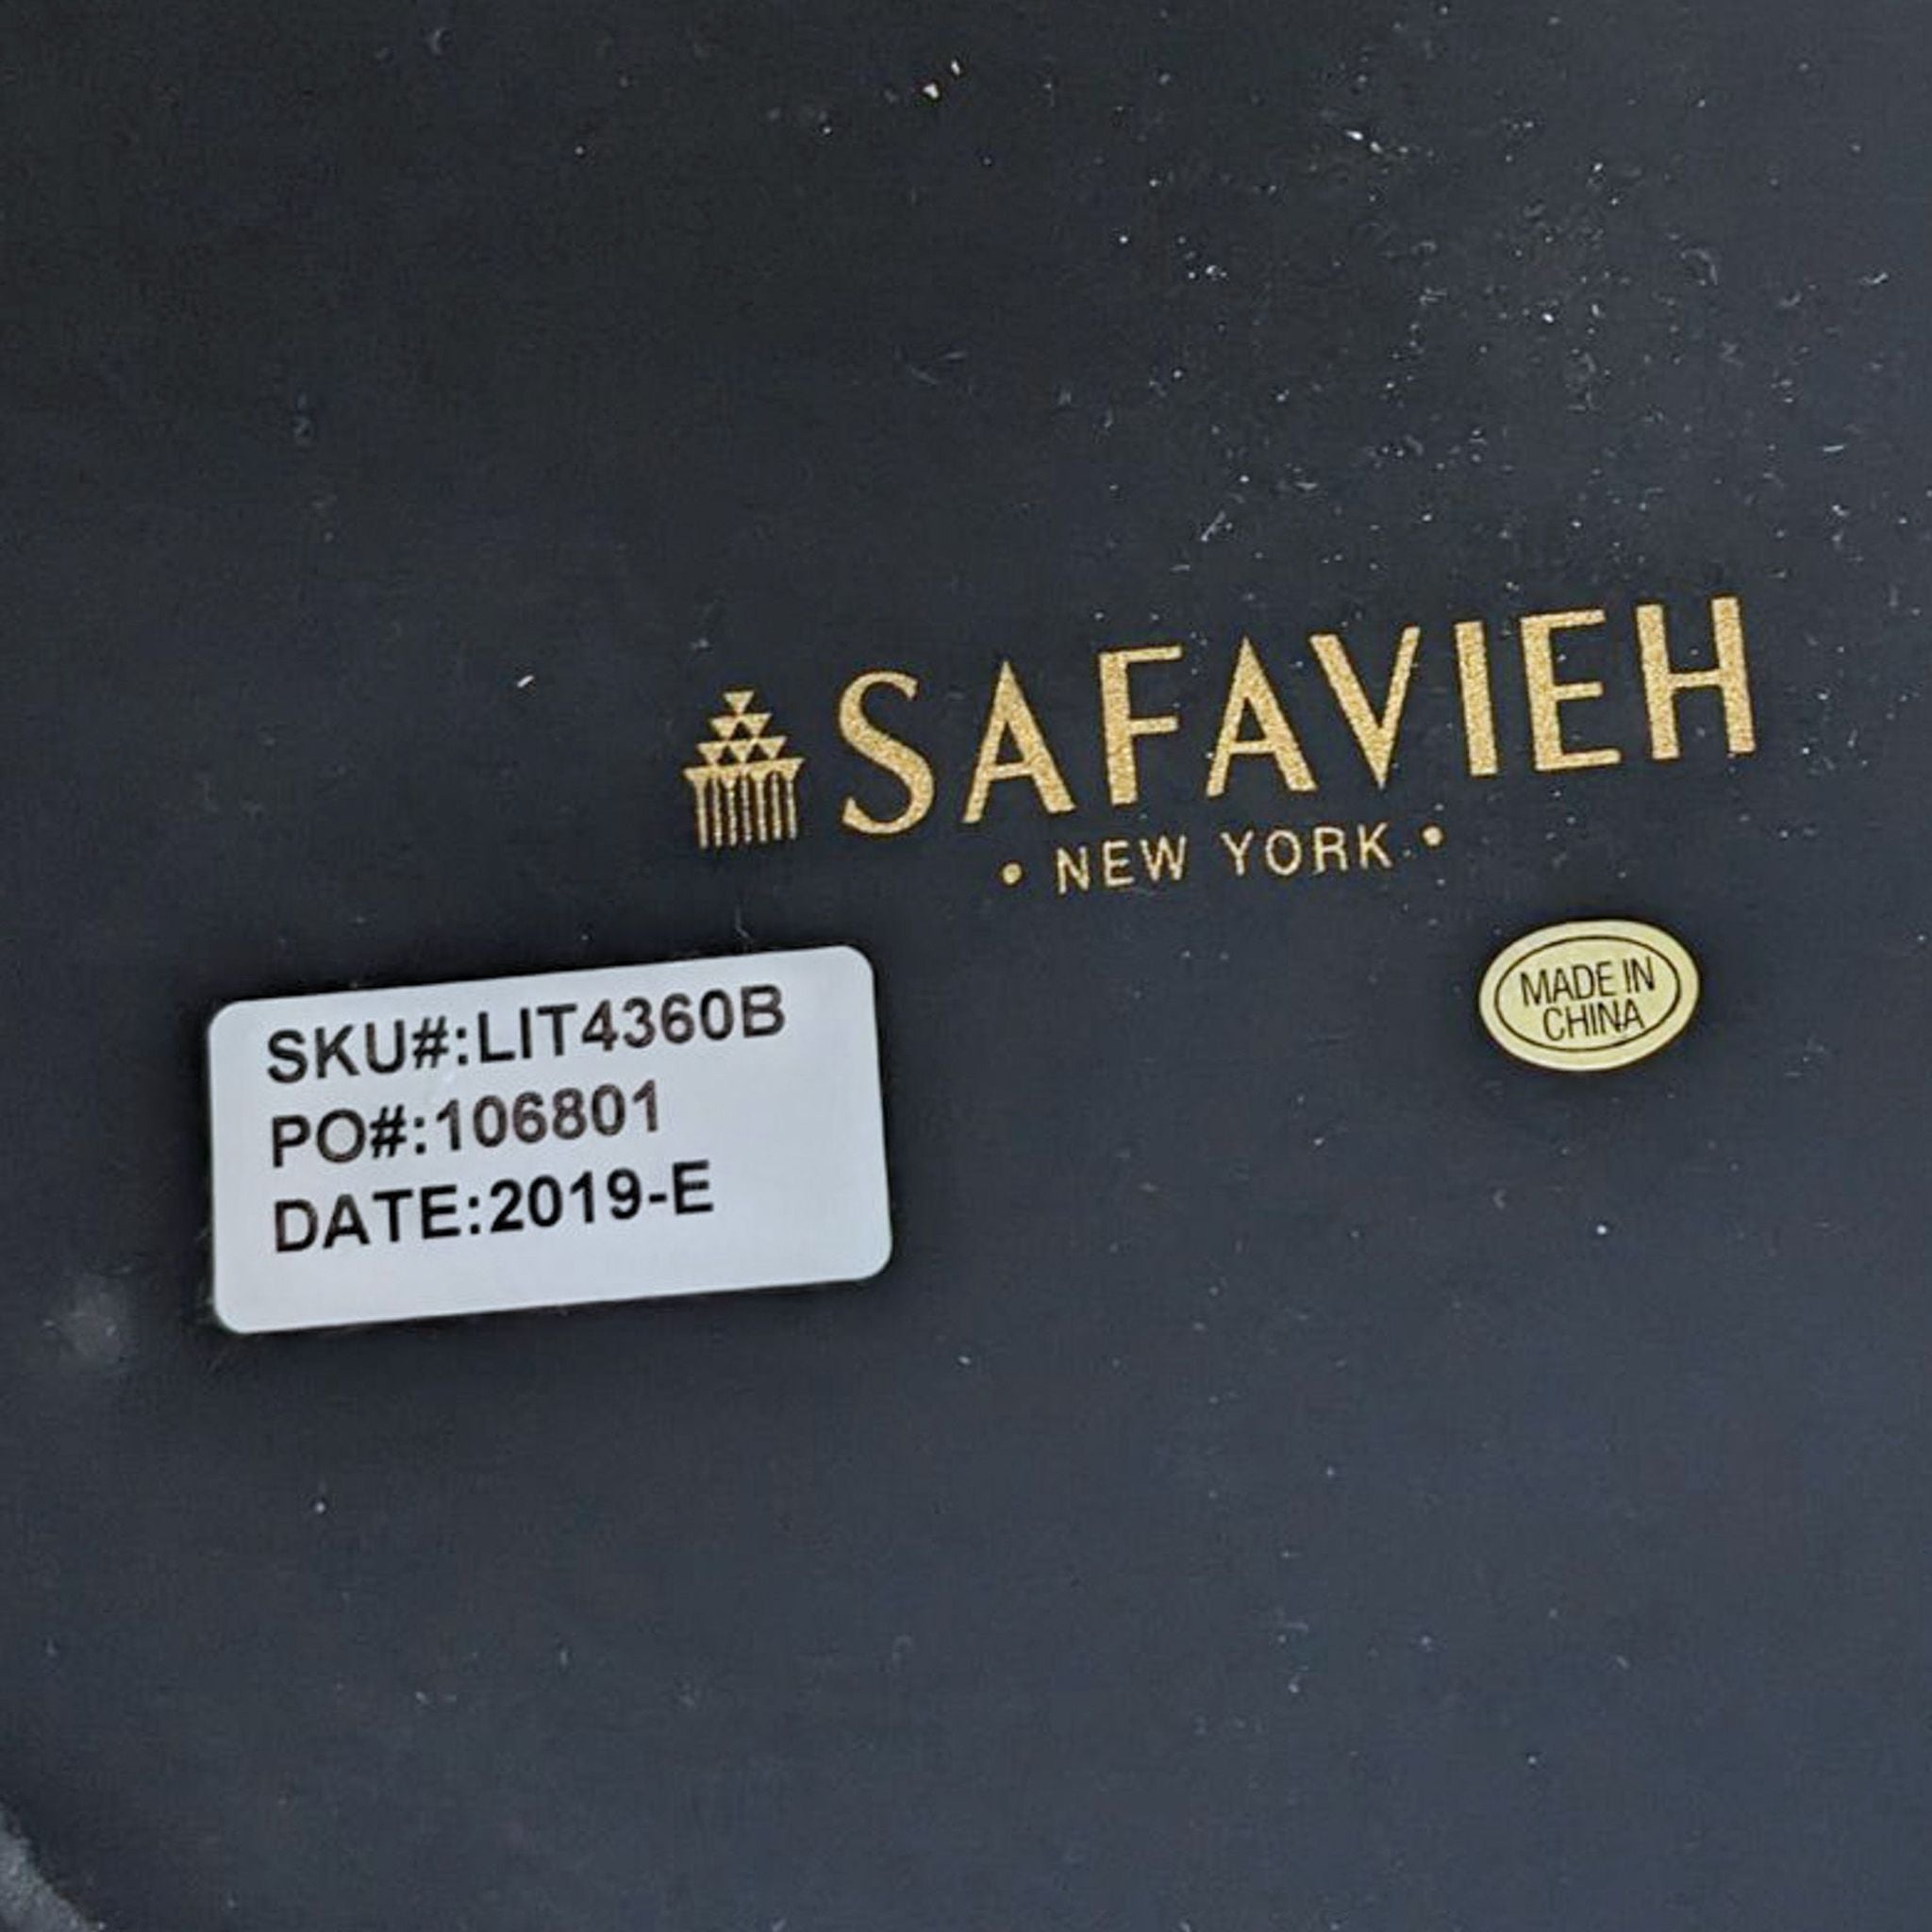 Alt text 2: Close-up of a Safavieh lamp's underside label showing SKU, PO number, and "Made in China" badge.